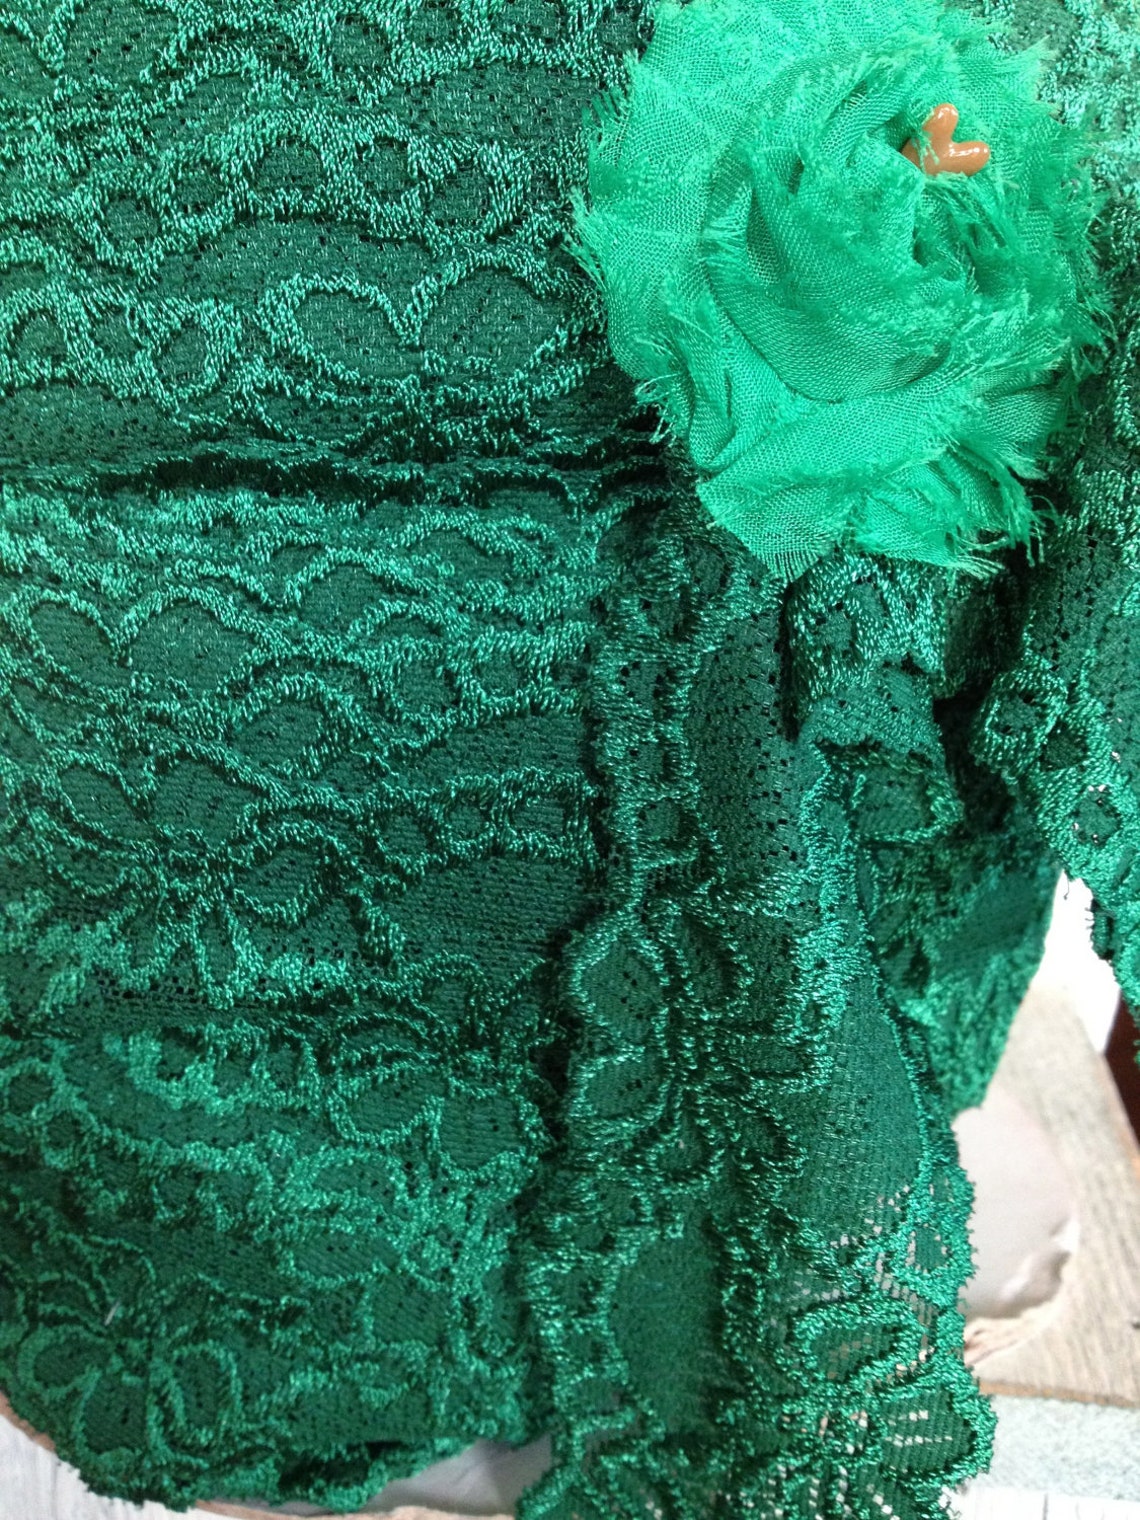 WIDE Stretch Lace EMERALD GREEN-2 1/2 inch 2 yards for 2.99 | Etsy